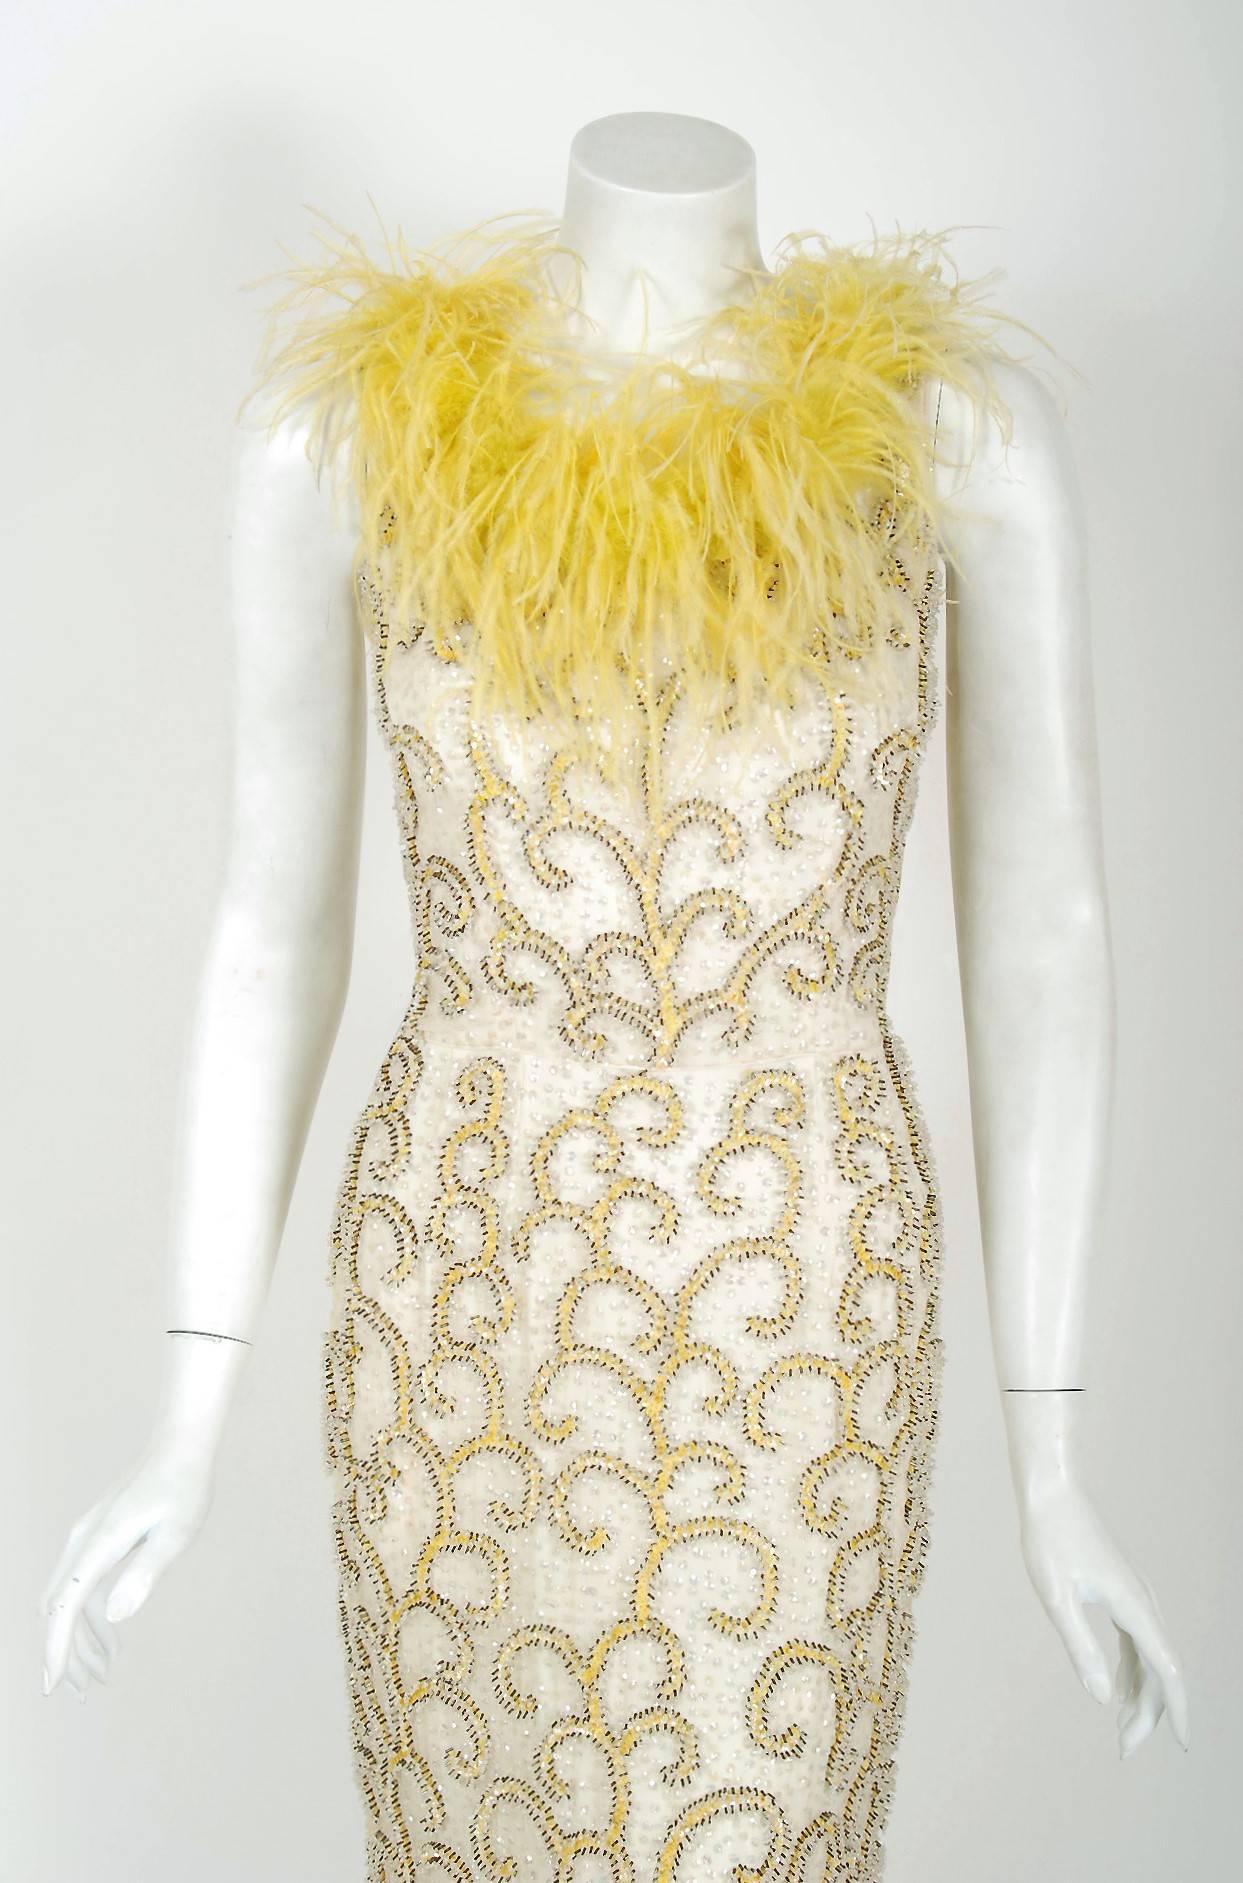 A breathtaking early 1960's fully-beaded hourglass gown that is simply in a class of its own! This treasure has a fantastic abstract swirl pattern worked in, featuring three-dimensional scrolls around dazzling glass-beads. The base is a soft